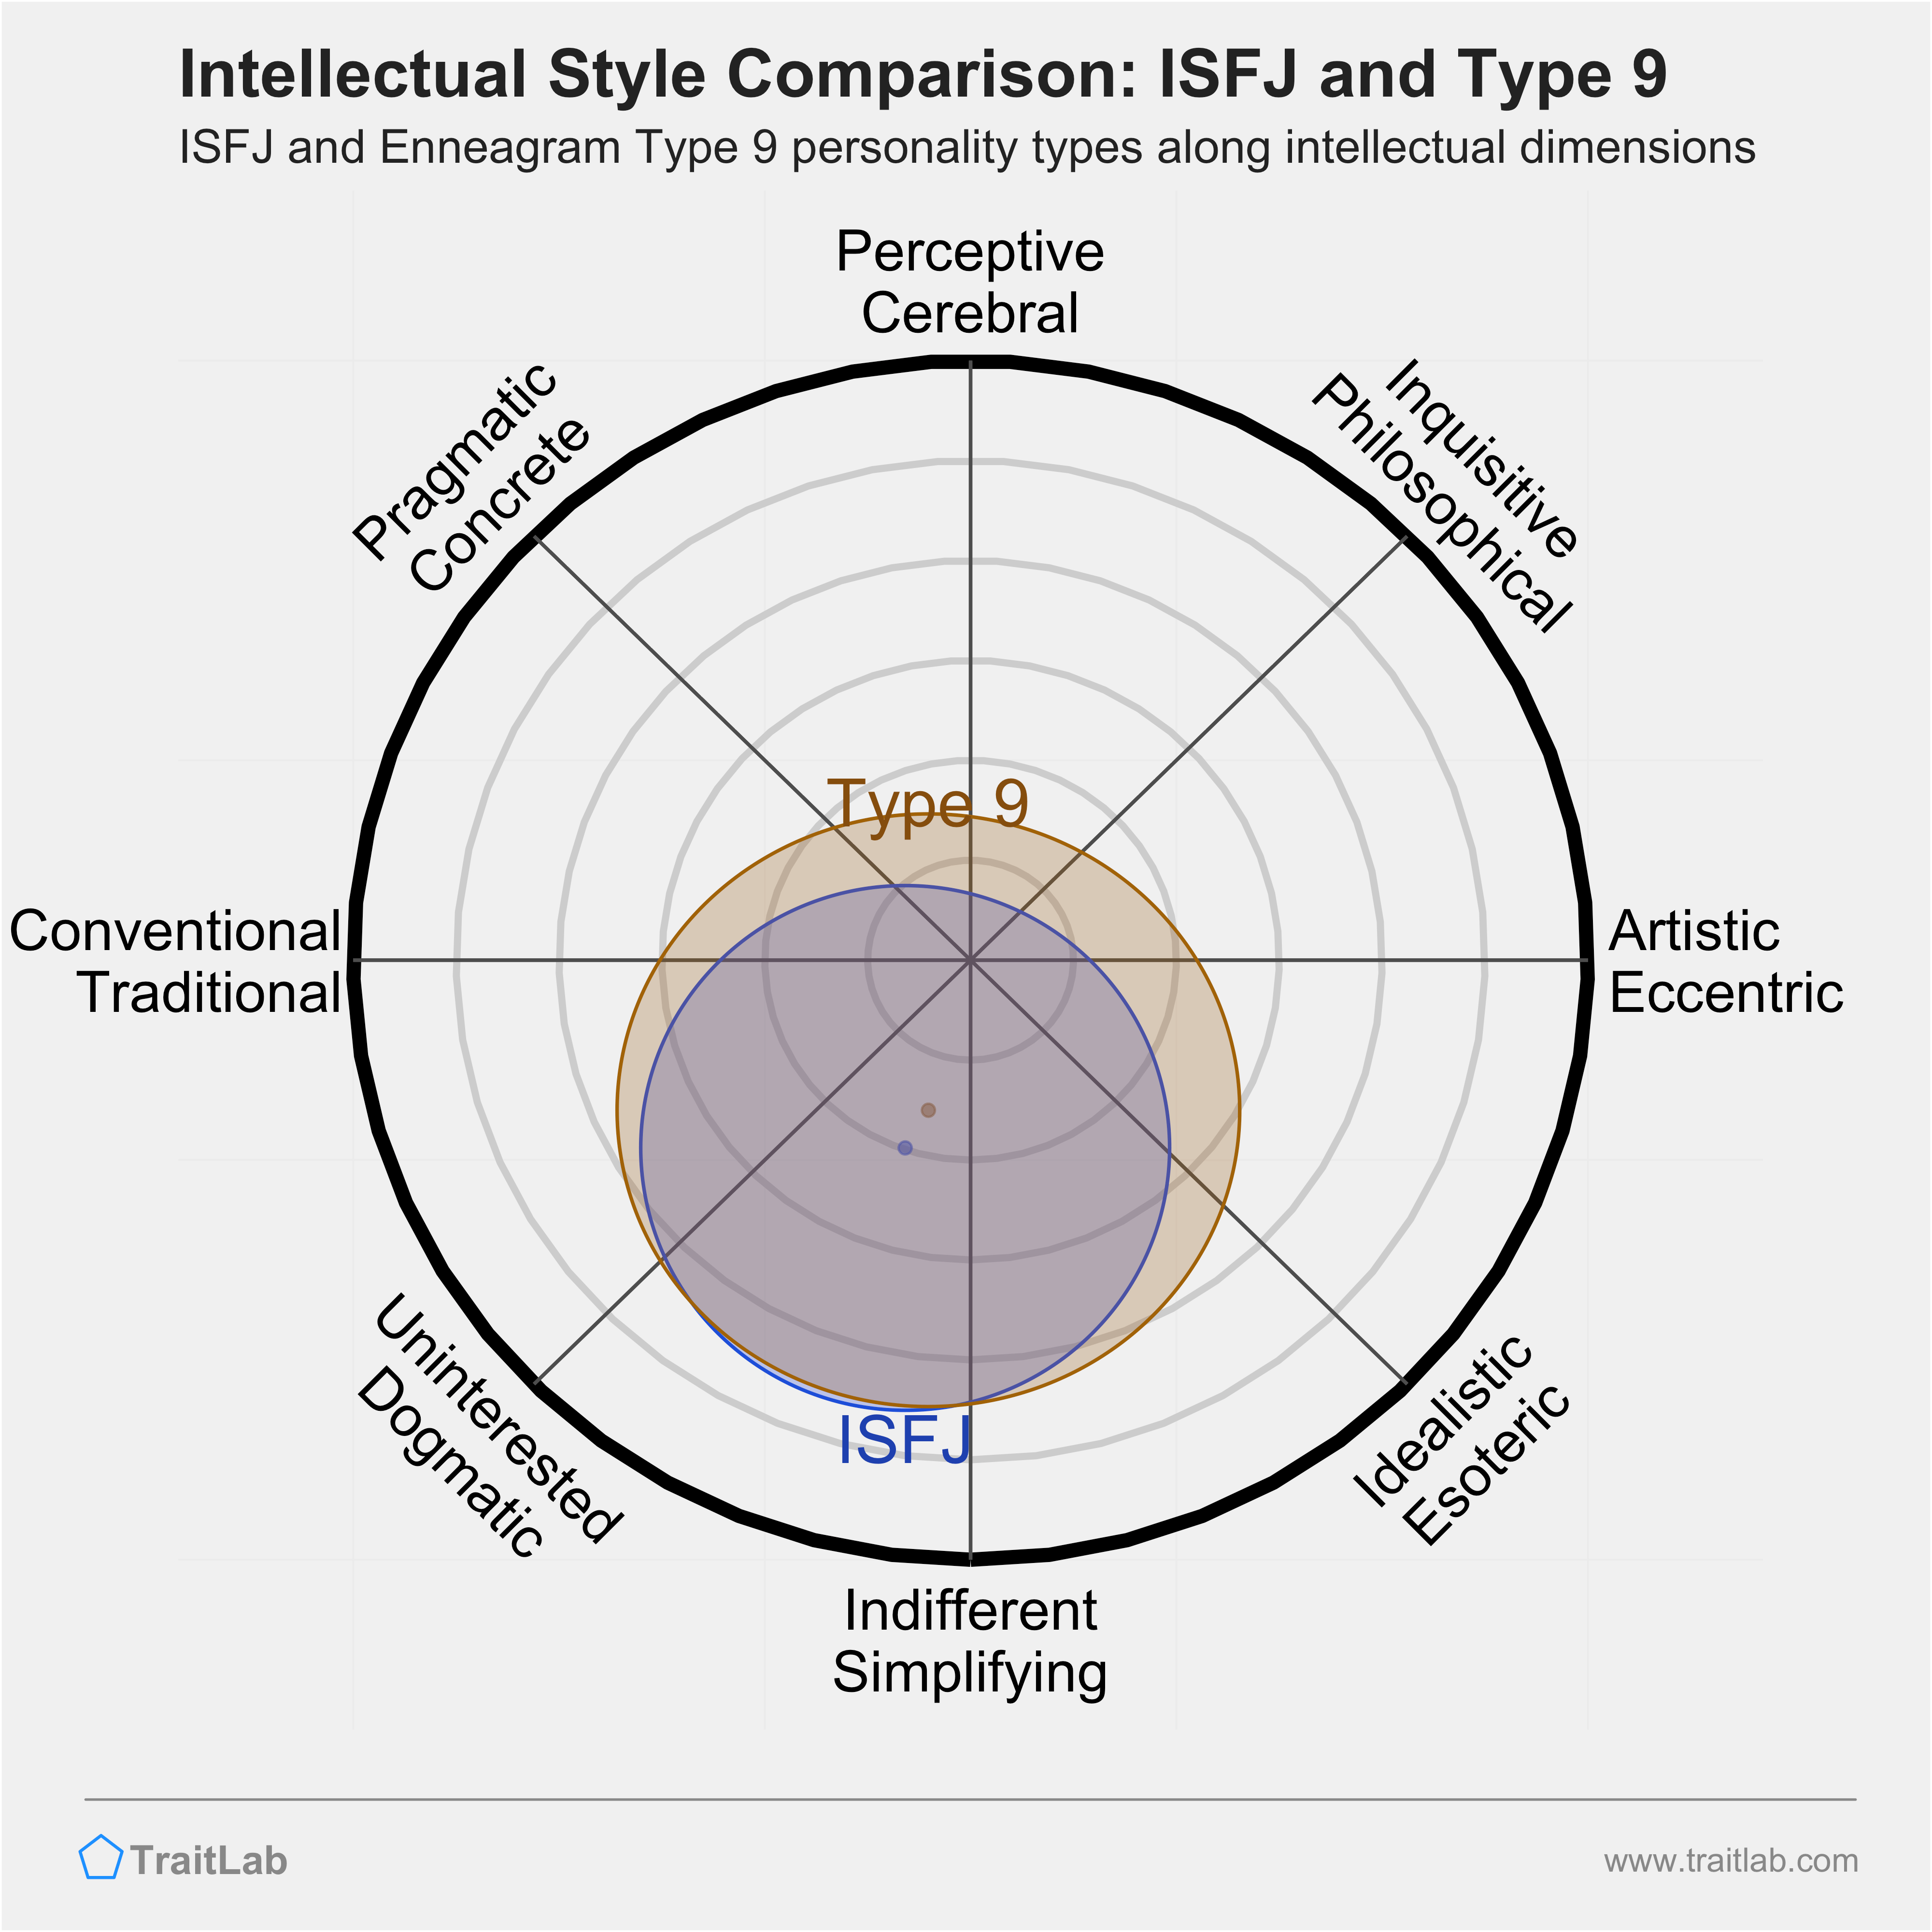 ISFJ and Type 9 comparison across intellectual dimensions